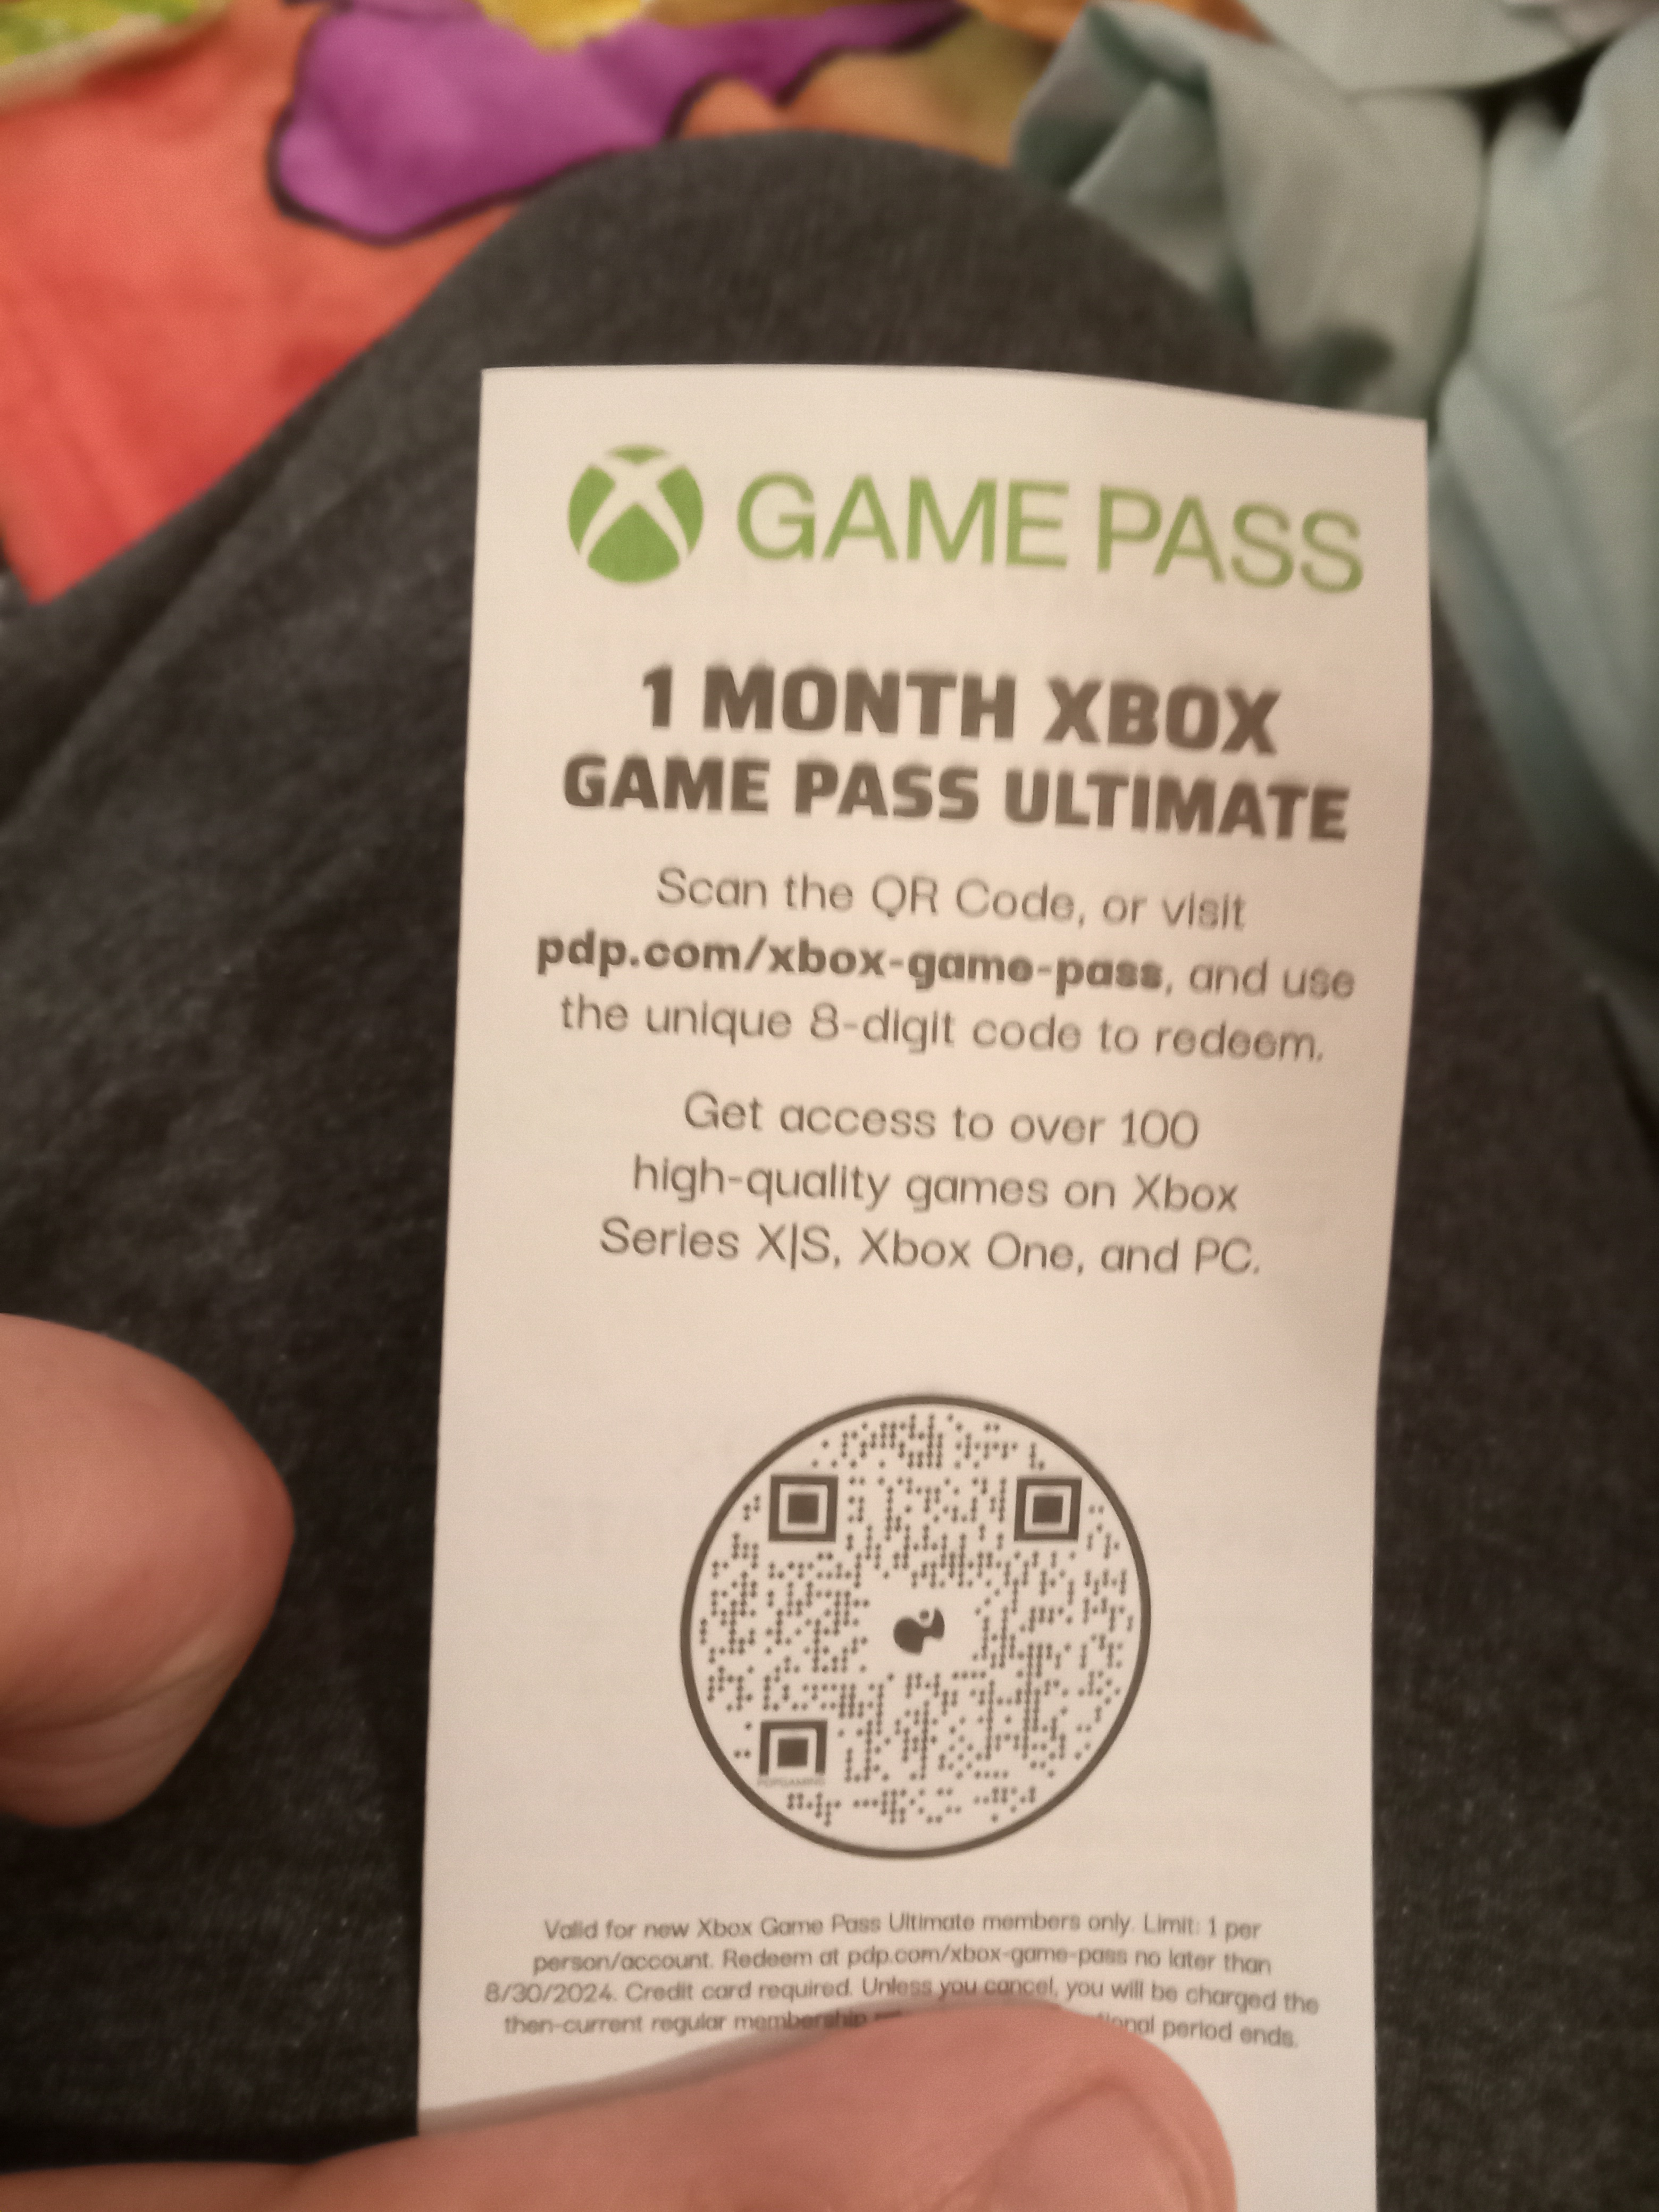 Buy 1 month of Xbox Game Pass Ultimate for just $8 right now